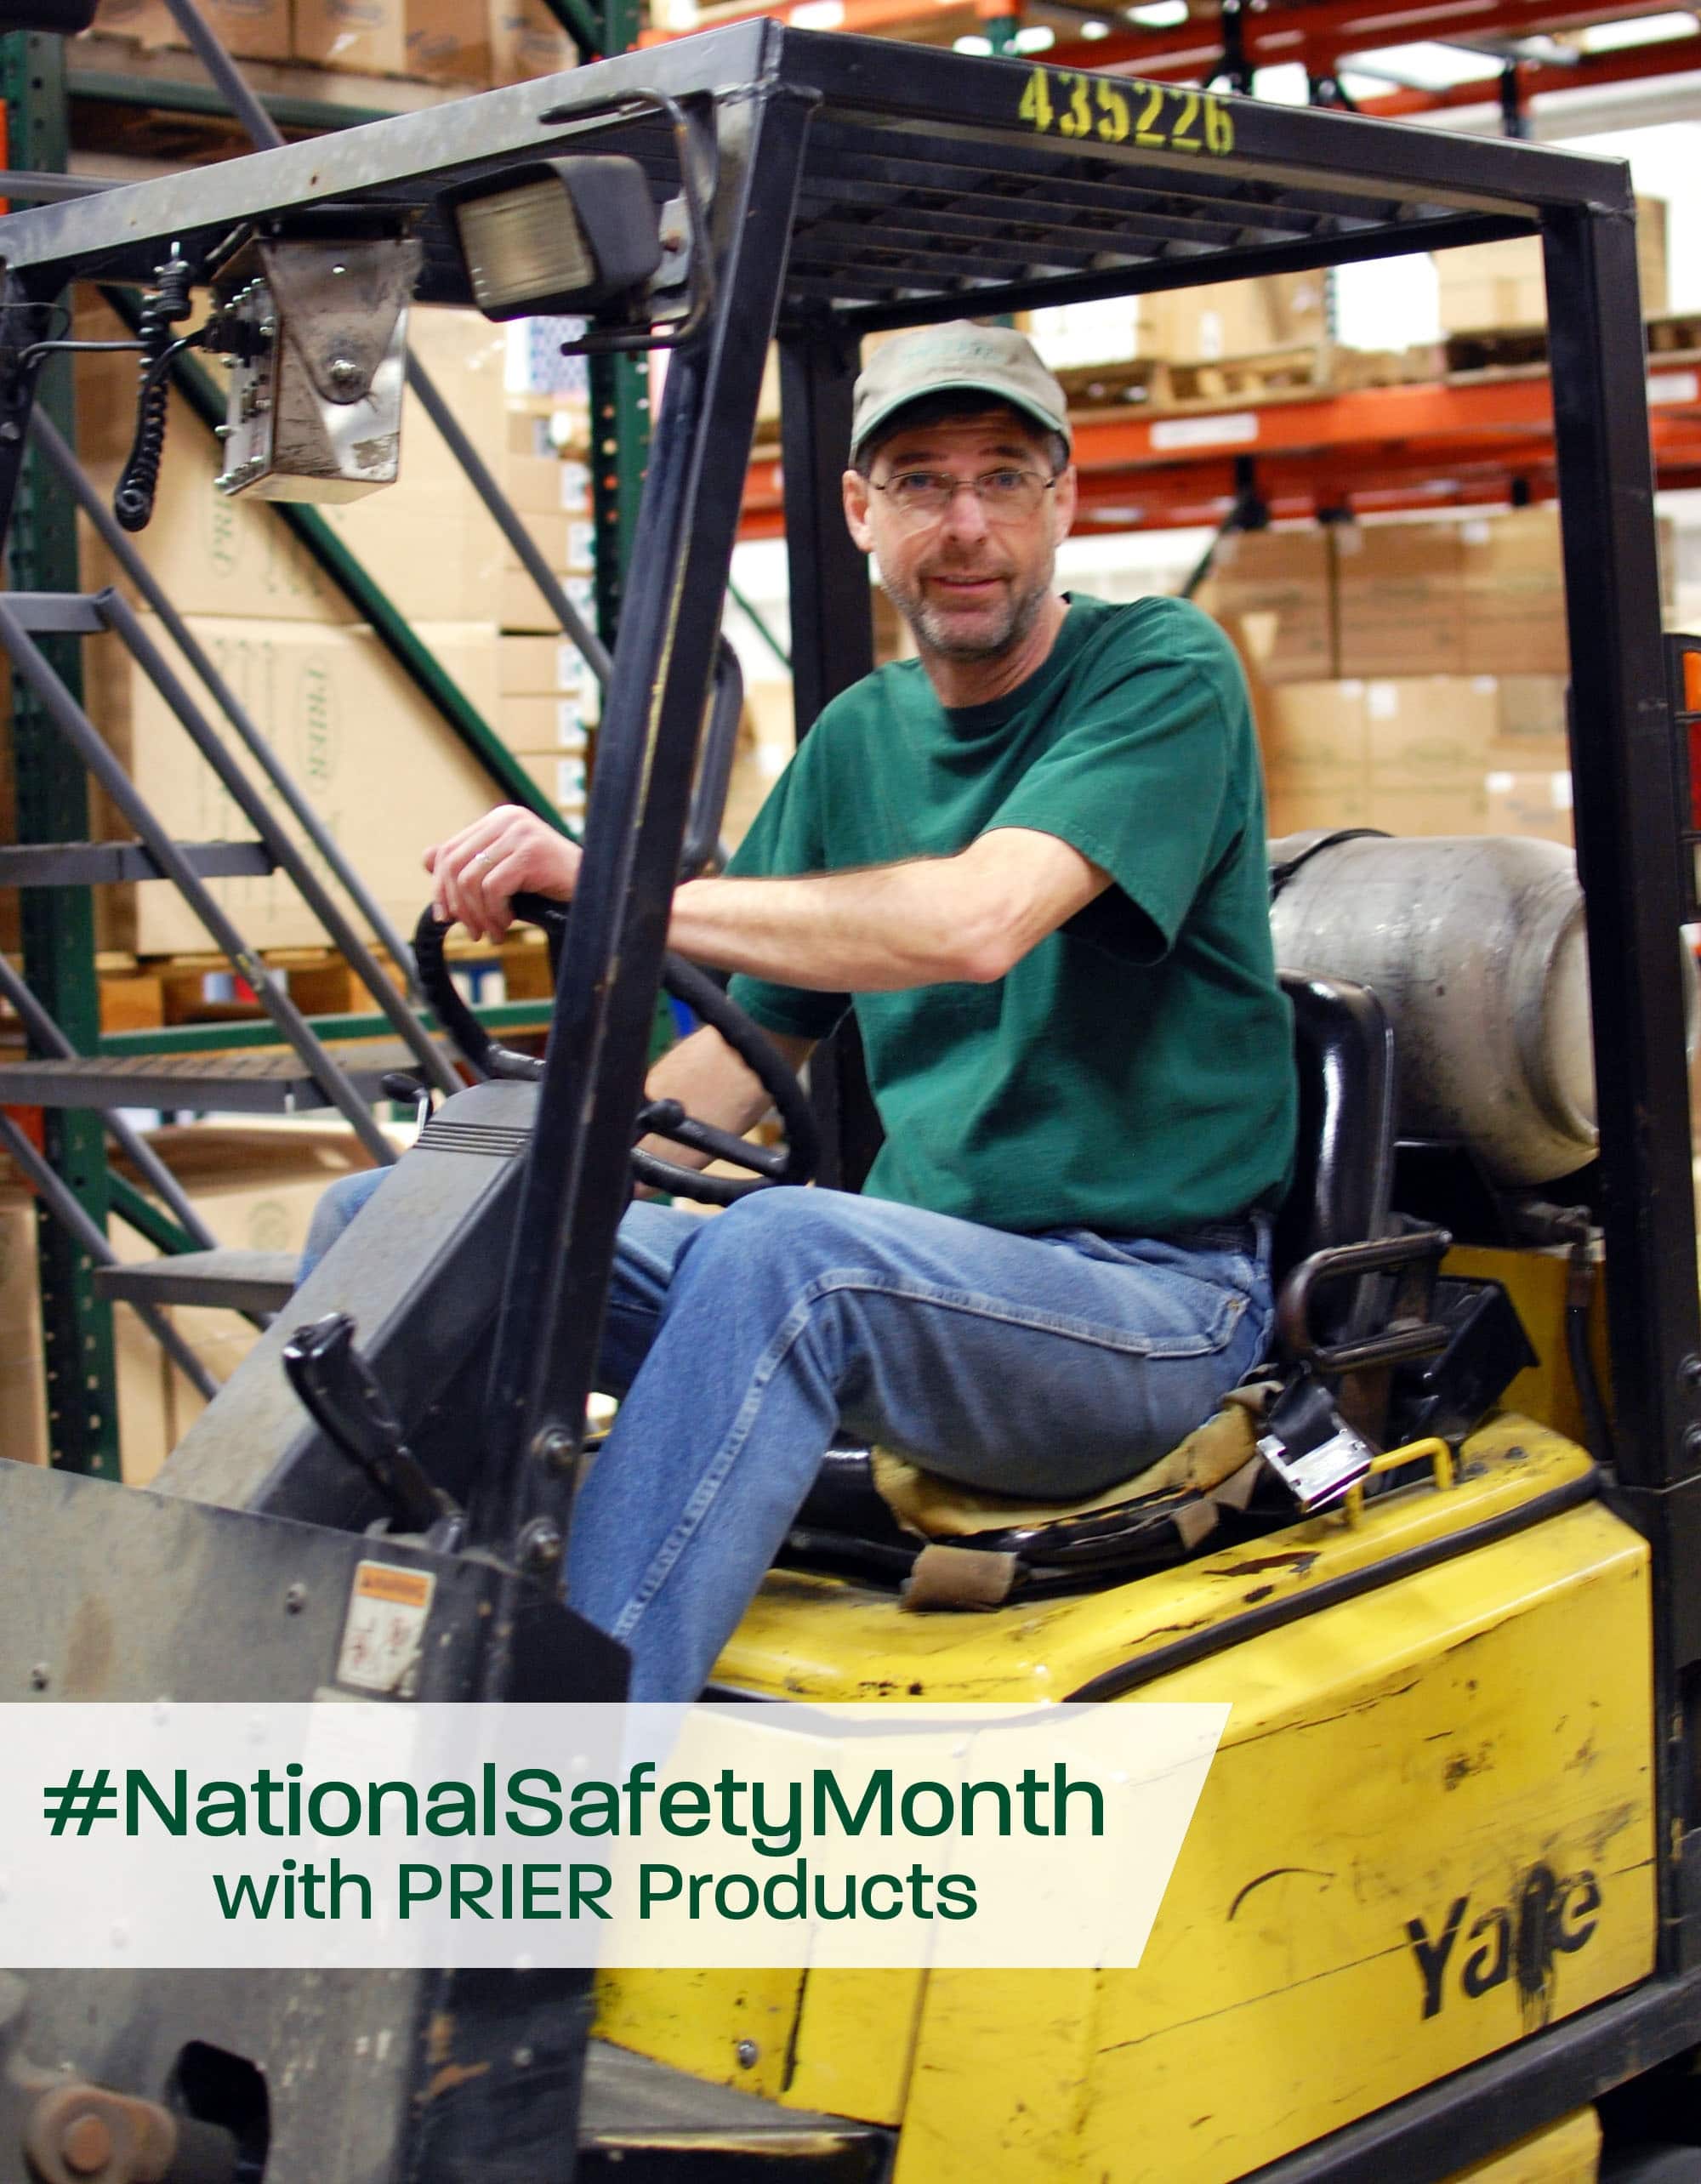 PRIER Takes On National Safety Month